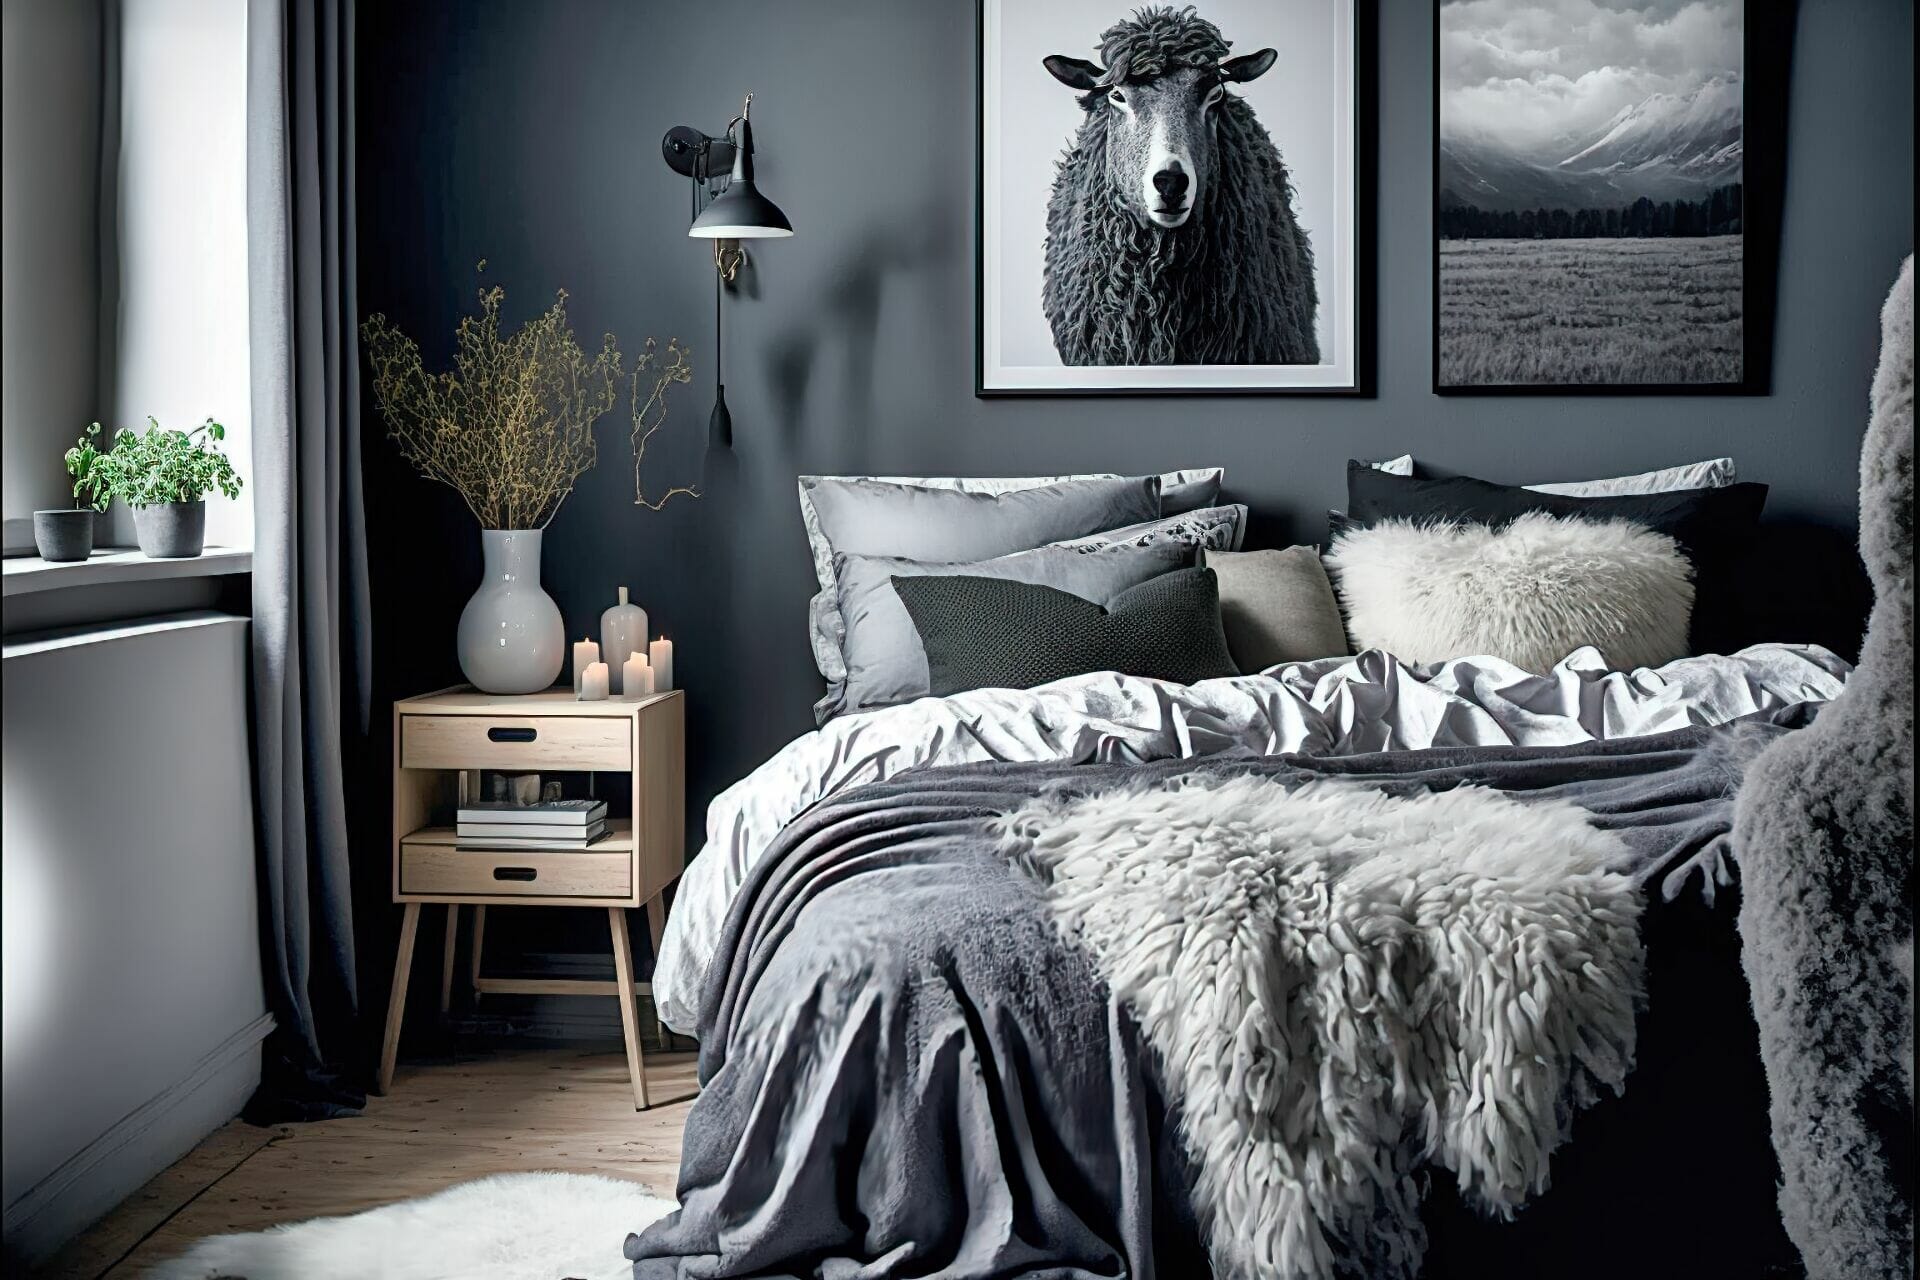 A Scandinavian Style Bedroom With Black And Grey Accents – This Bedroom Is Decorated With Black And Grey Colors For A Chic And Modern Look. The Walls Are A Light Grey, While The Bed Frame And Nightstand Are A Charcoal Wood. To Complete The Look, A White Sheepskin Rug Lies On The Floor, And Art Prints With Black And Grey Colors Hang On The Walls.